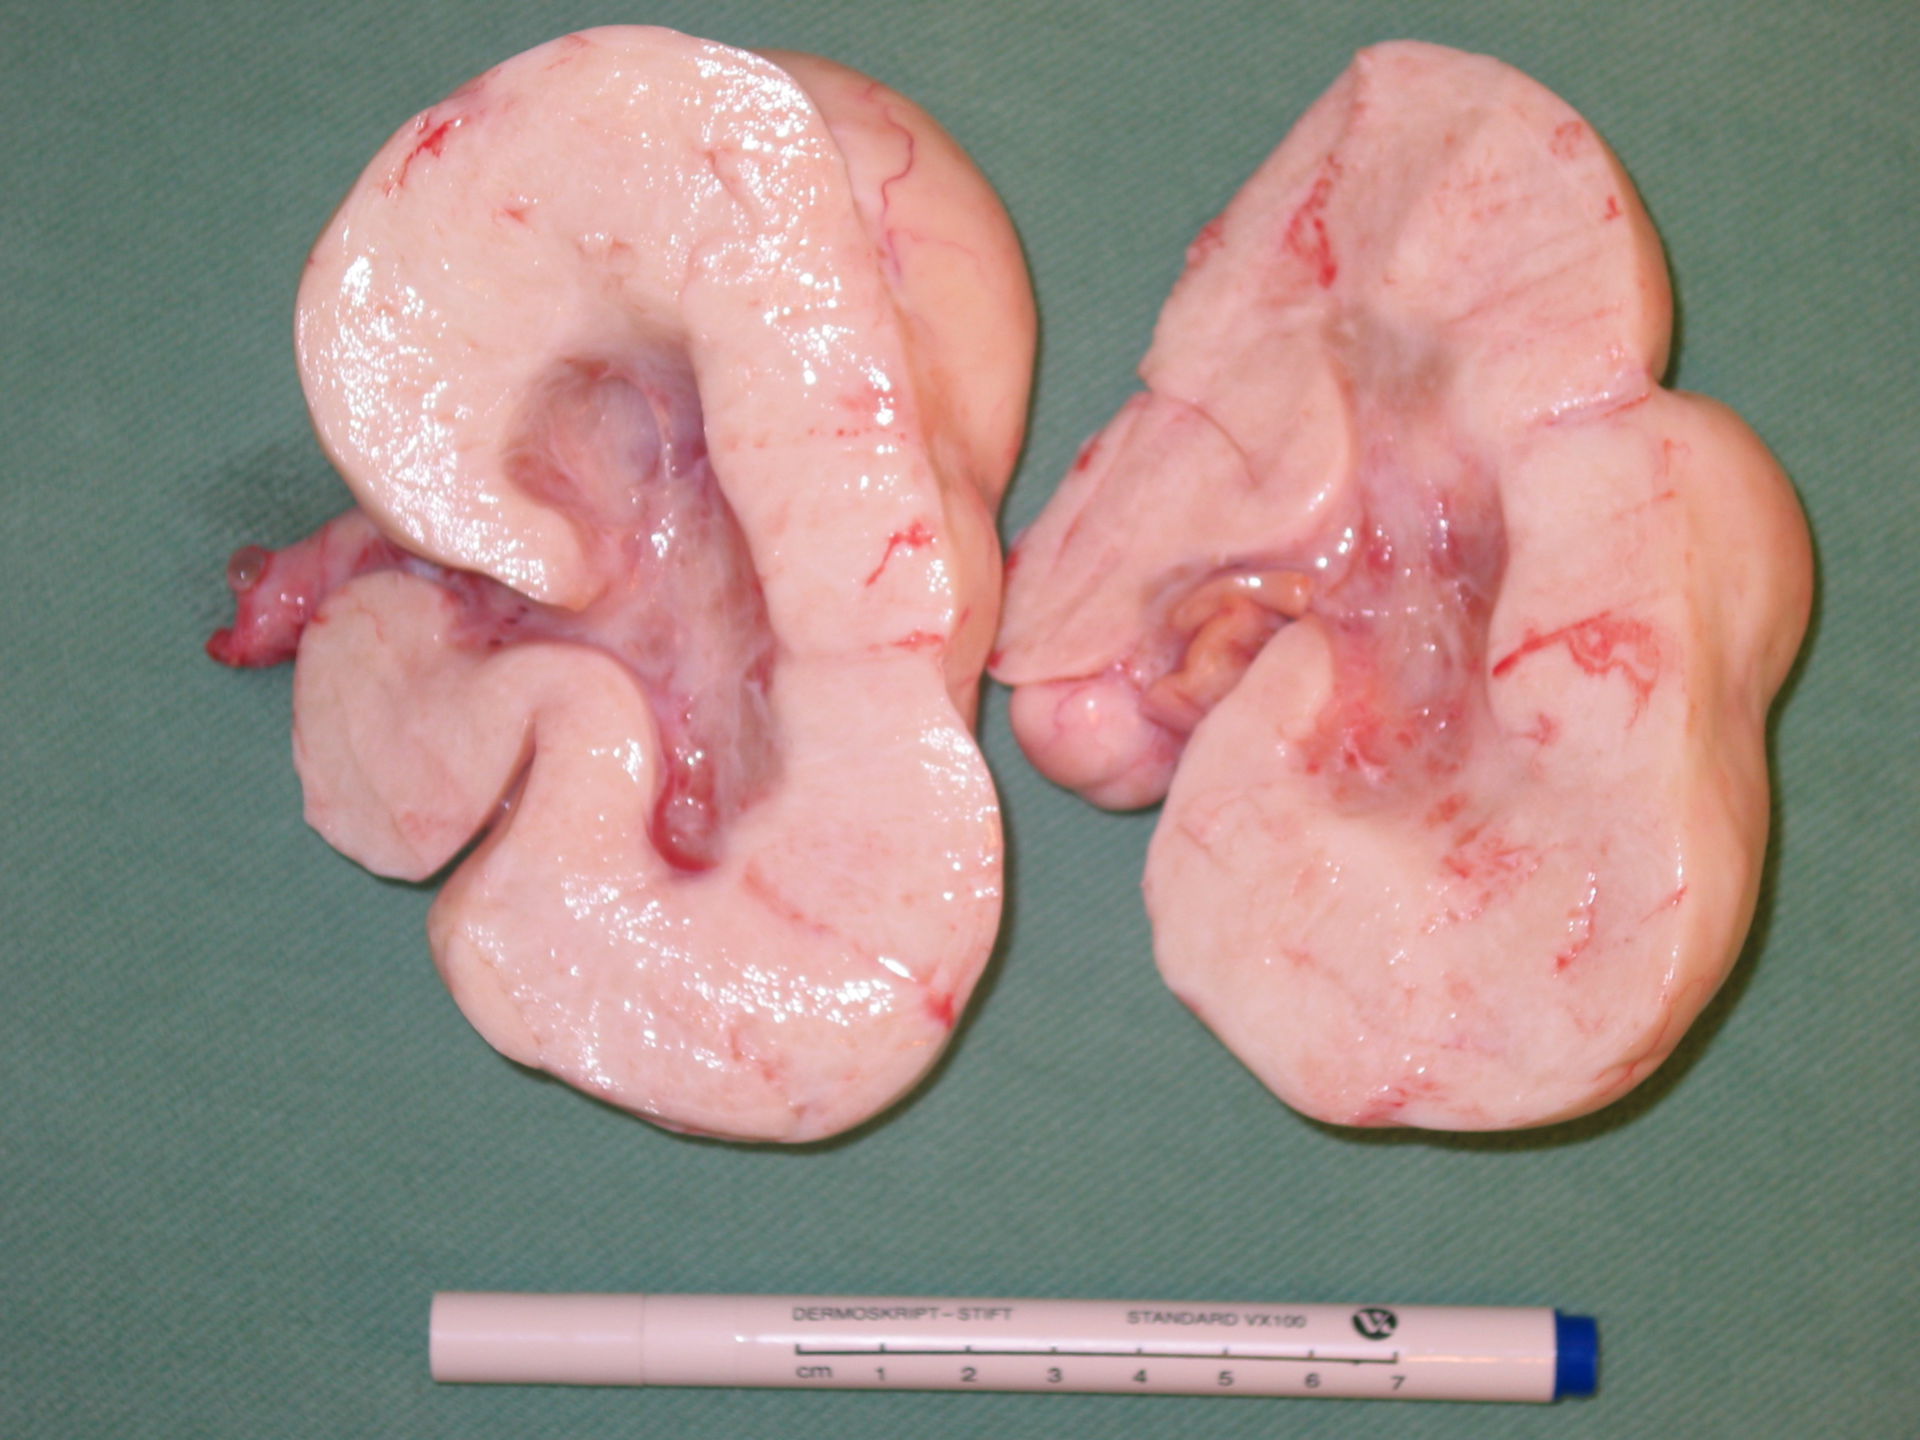 Granulosa-theca cell tumor of the ovary